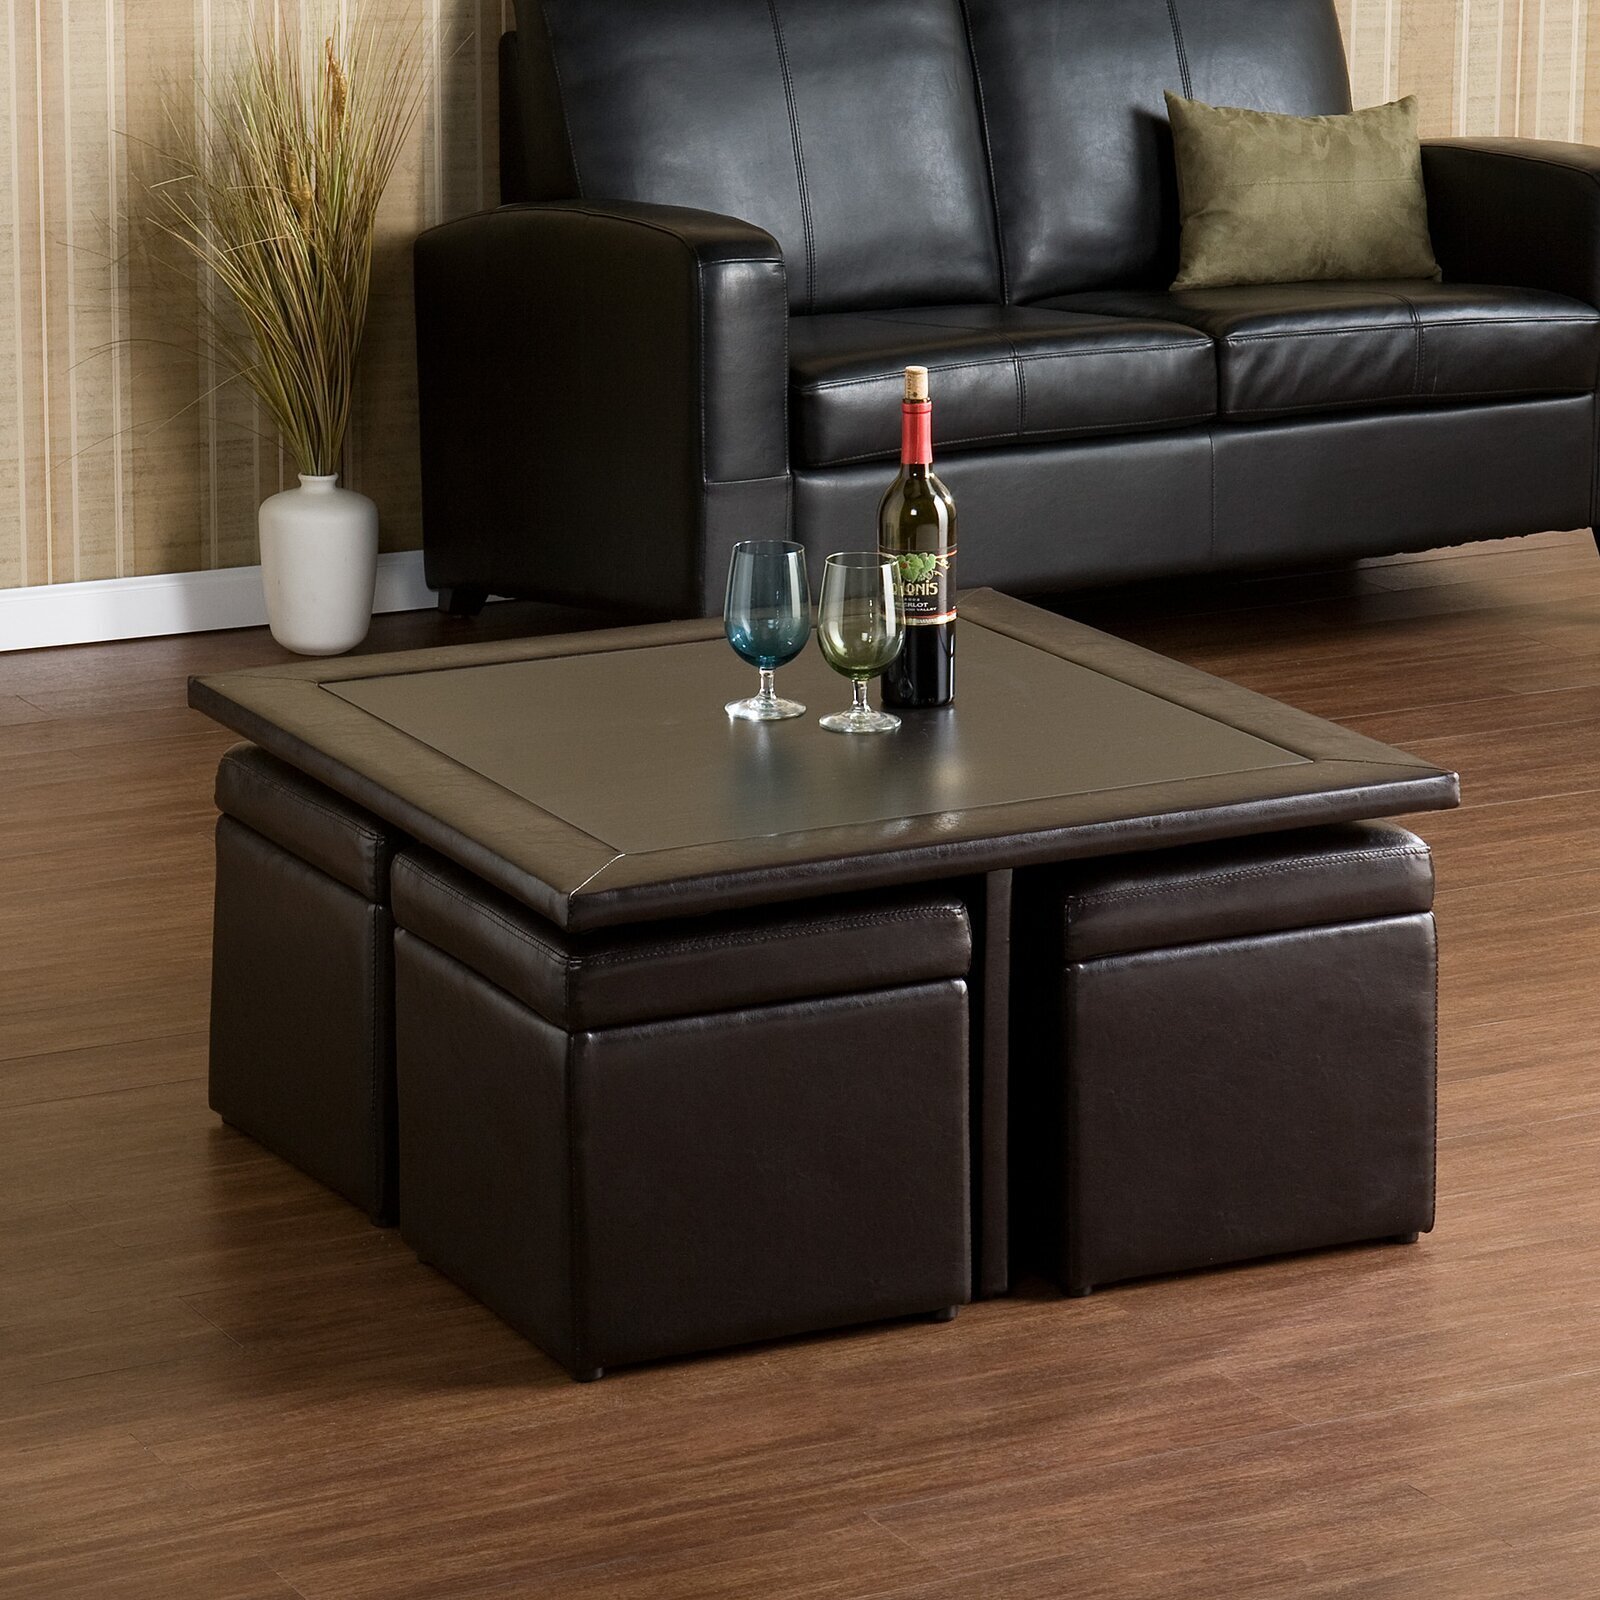 Compact nesting coffee table with stools